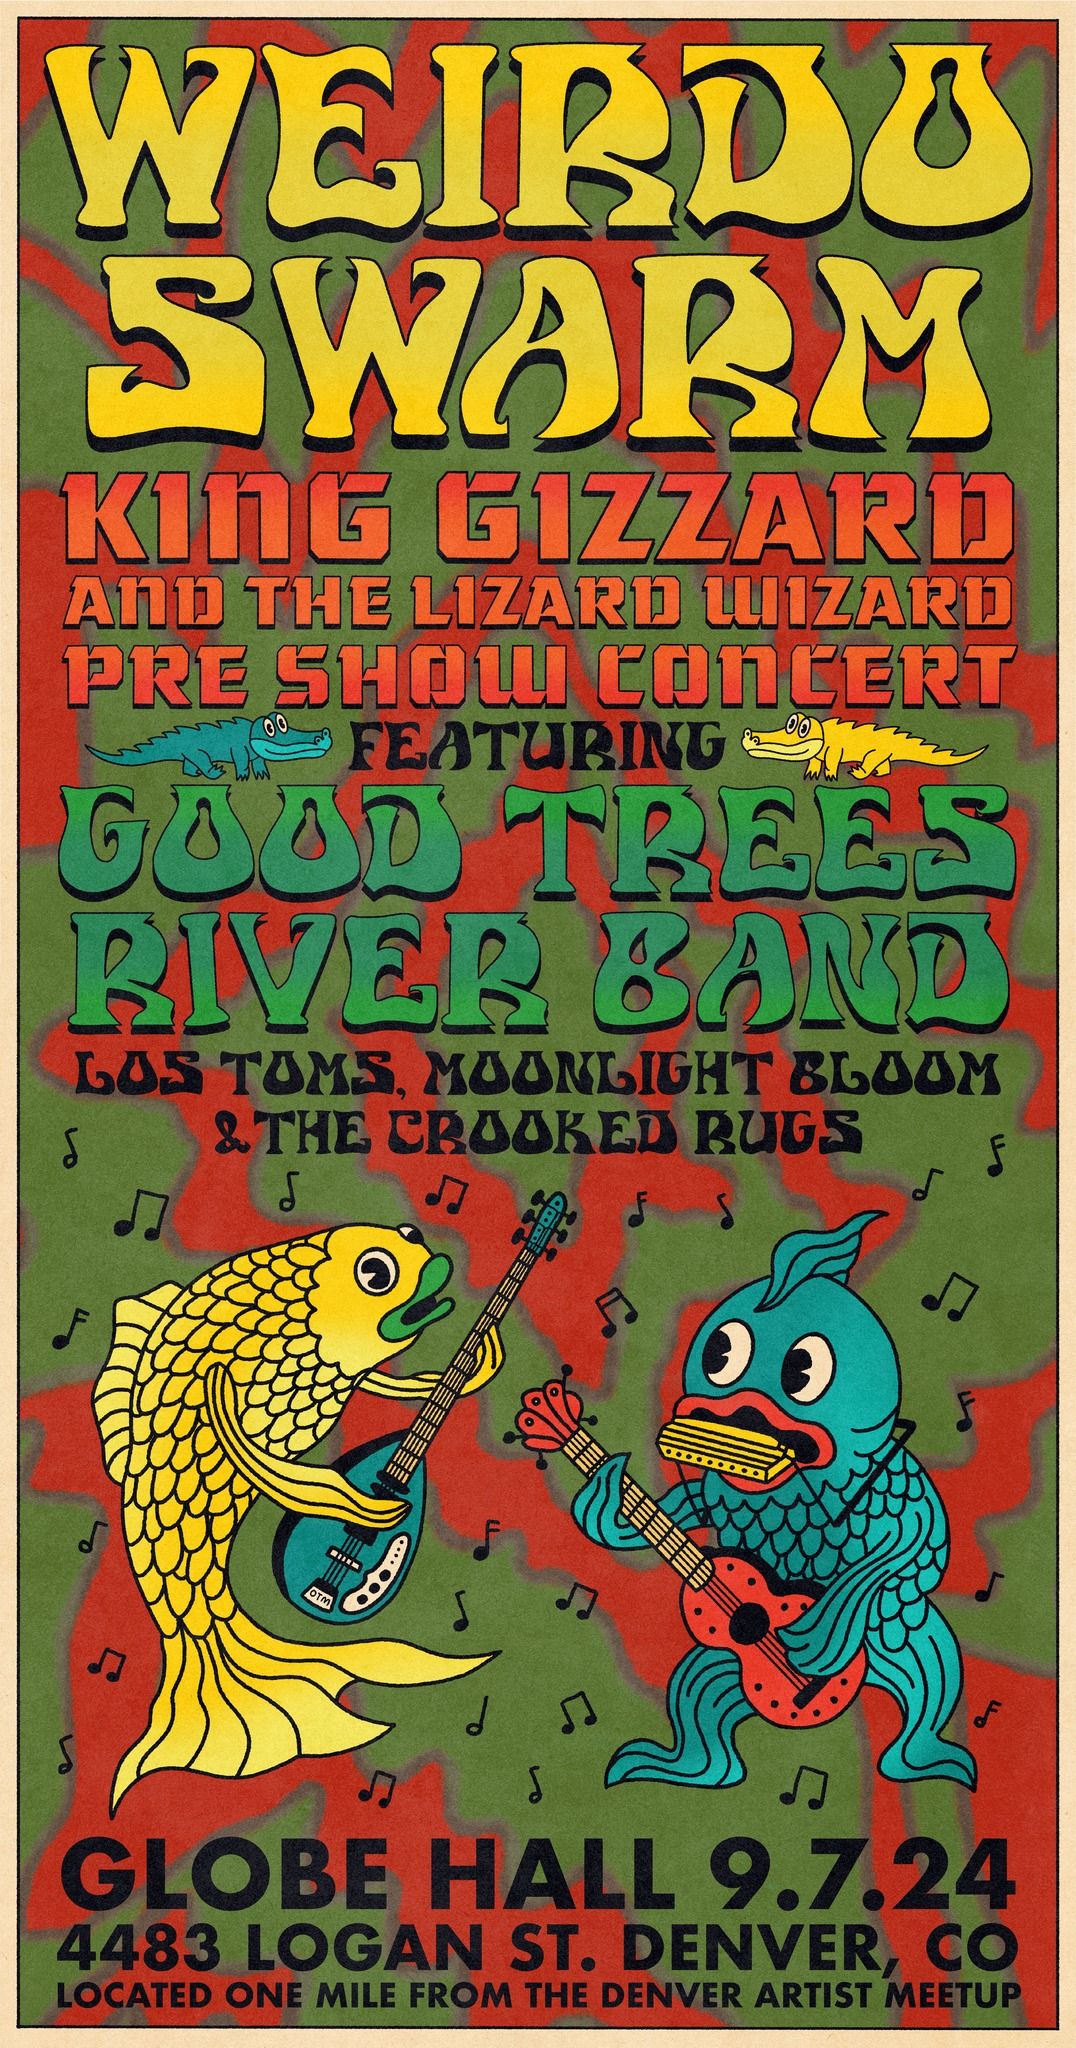 Weirdo Swarm Feat. Good Trees River Band w\/ Los Toms, Moonlight Bloom + Crooked Rugs (a King Gizzard